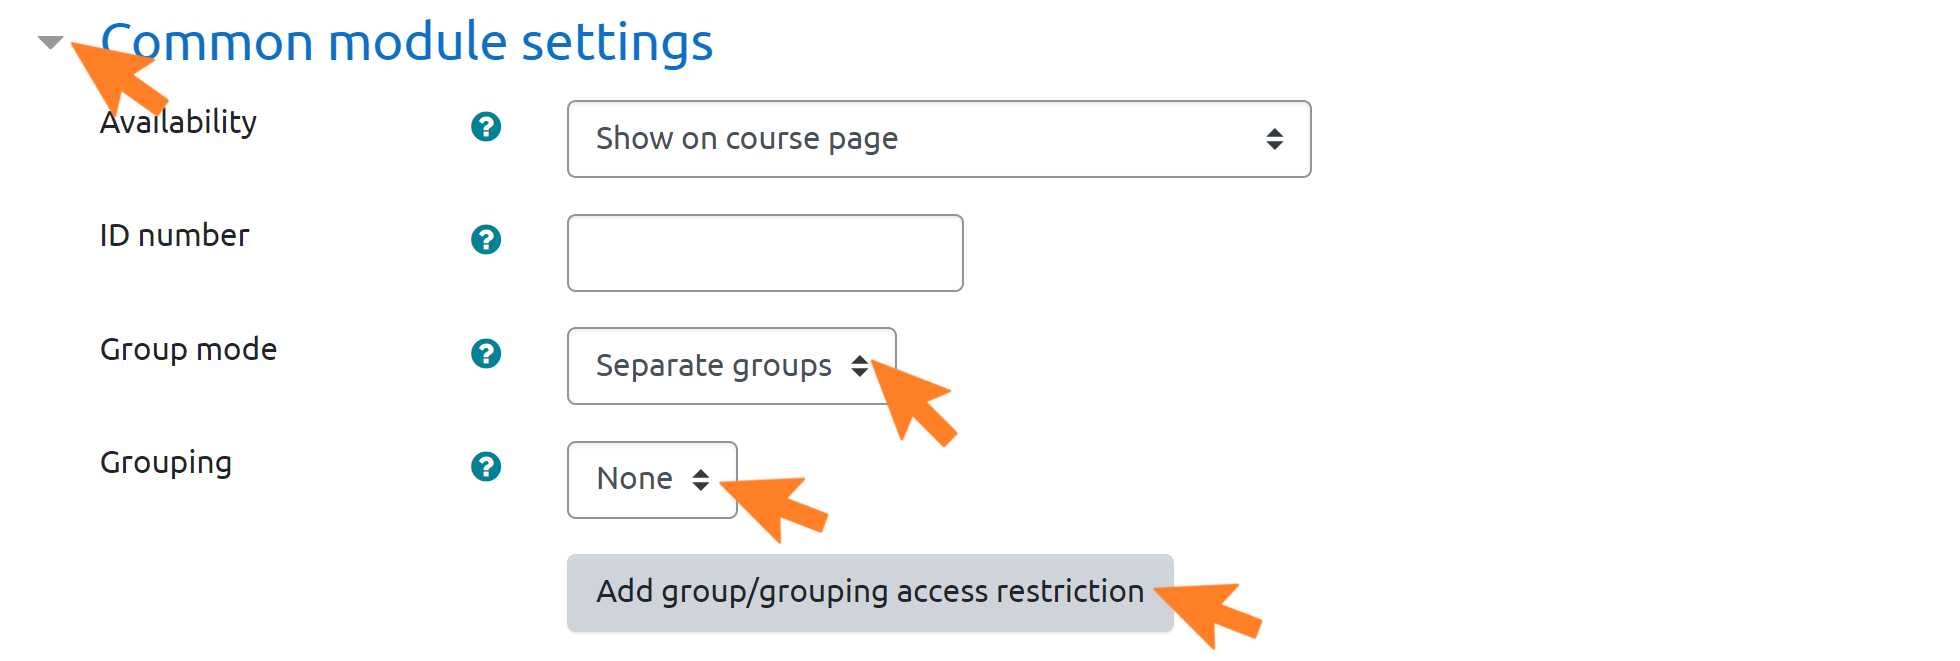 Screenshot of the 'Common module settings' in Moodle assessment page setup. There is an orange arrow pointing towards the button for expanding the menu. There is another orange arrow pointing towards the 